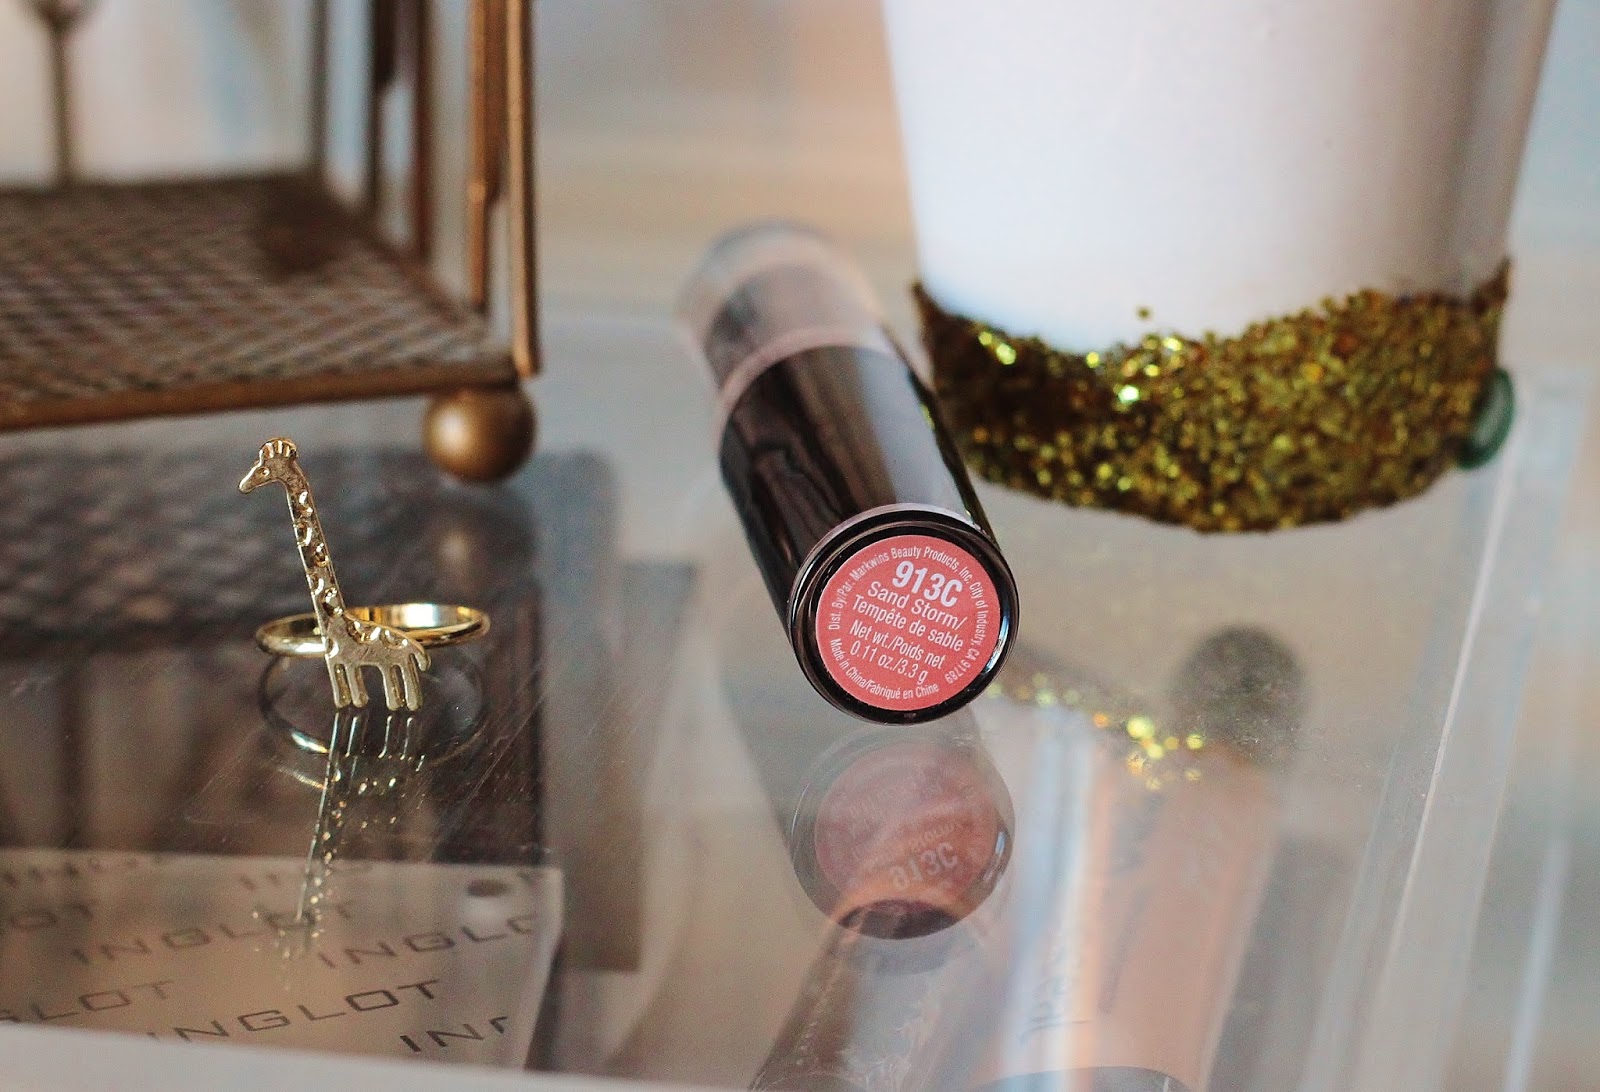 wet n wild mega last matte lipstick in sand storm review and swatch